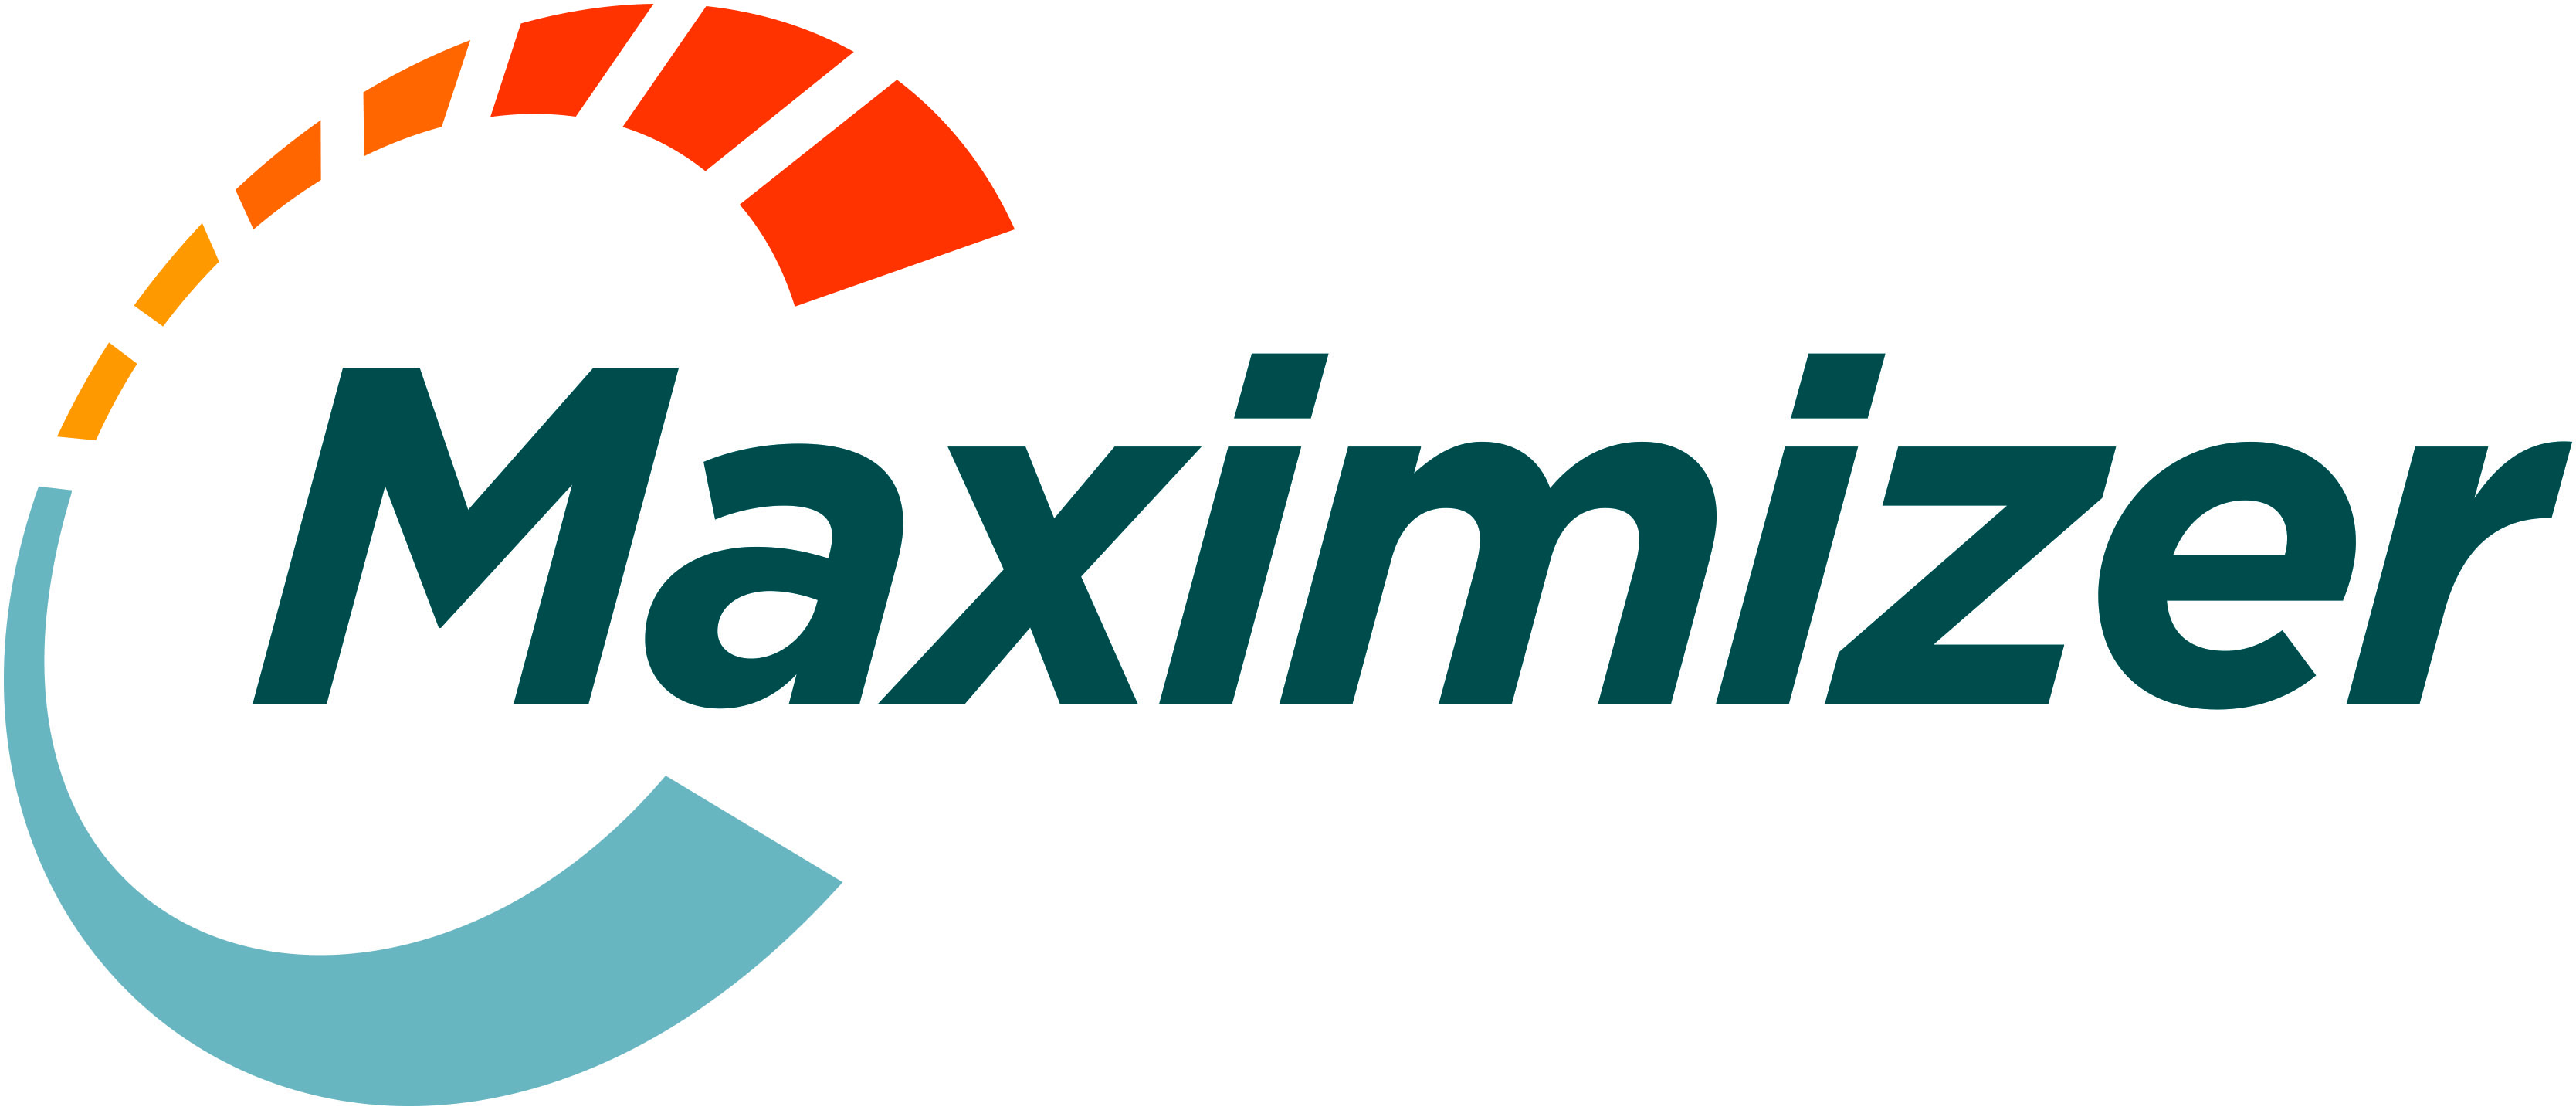 Student Matching Service Partners With Maximizer to Streamline Its EDU ...